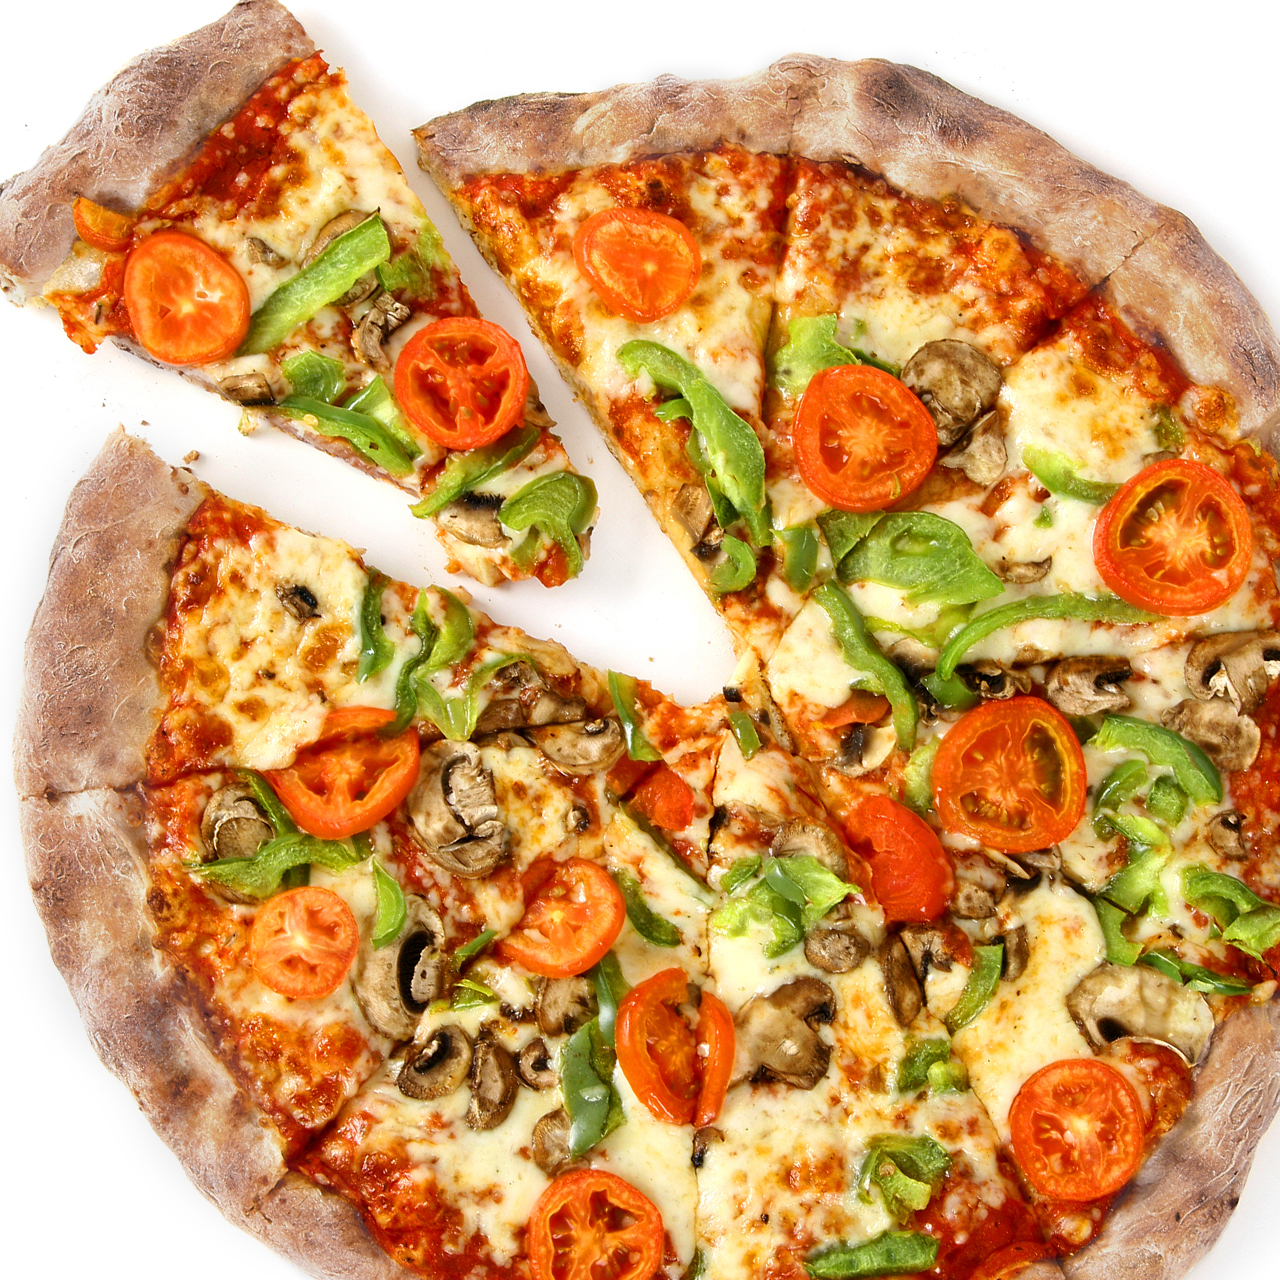 Picture of pizza with vegetable toppings